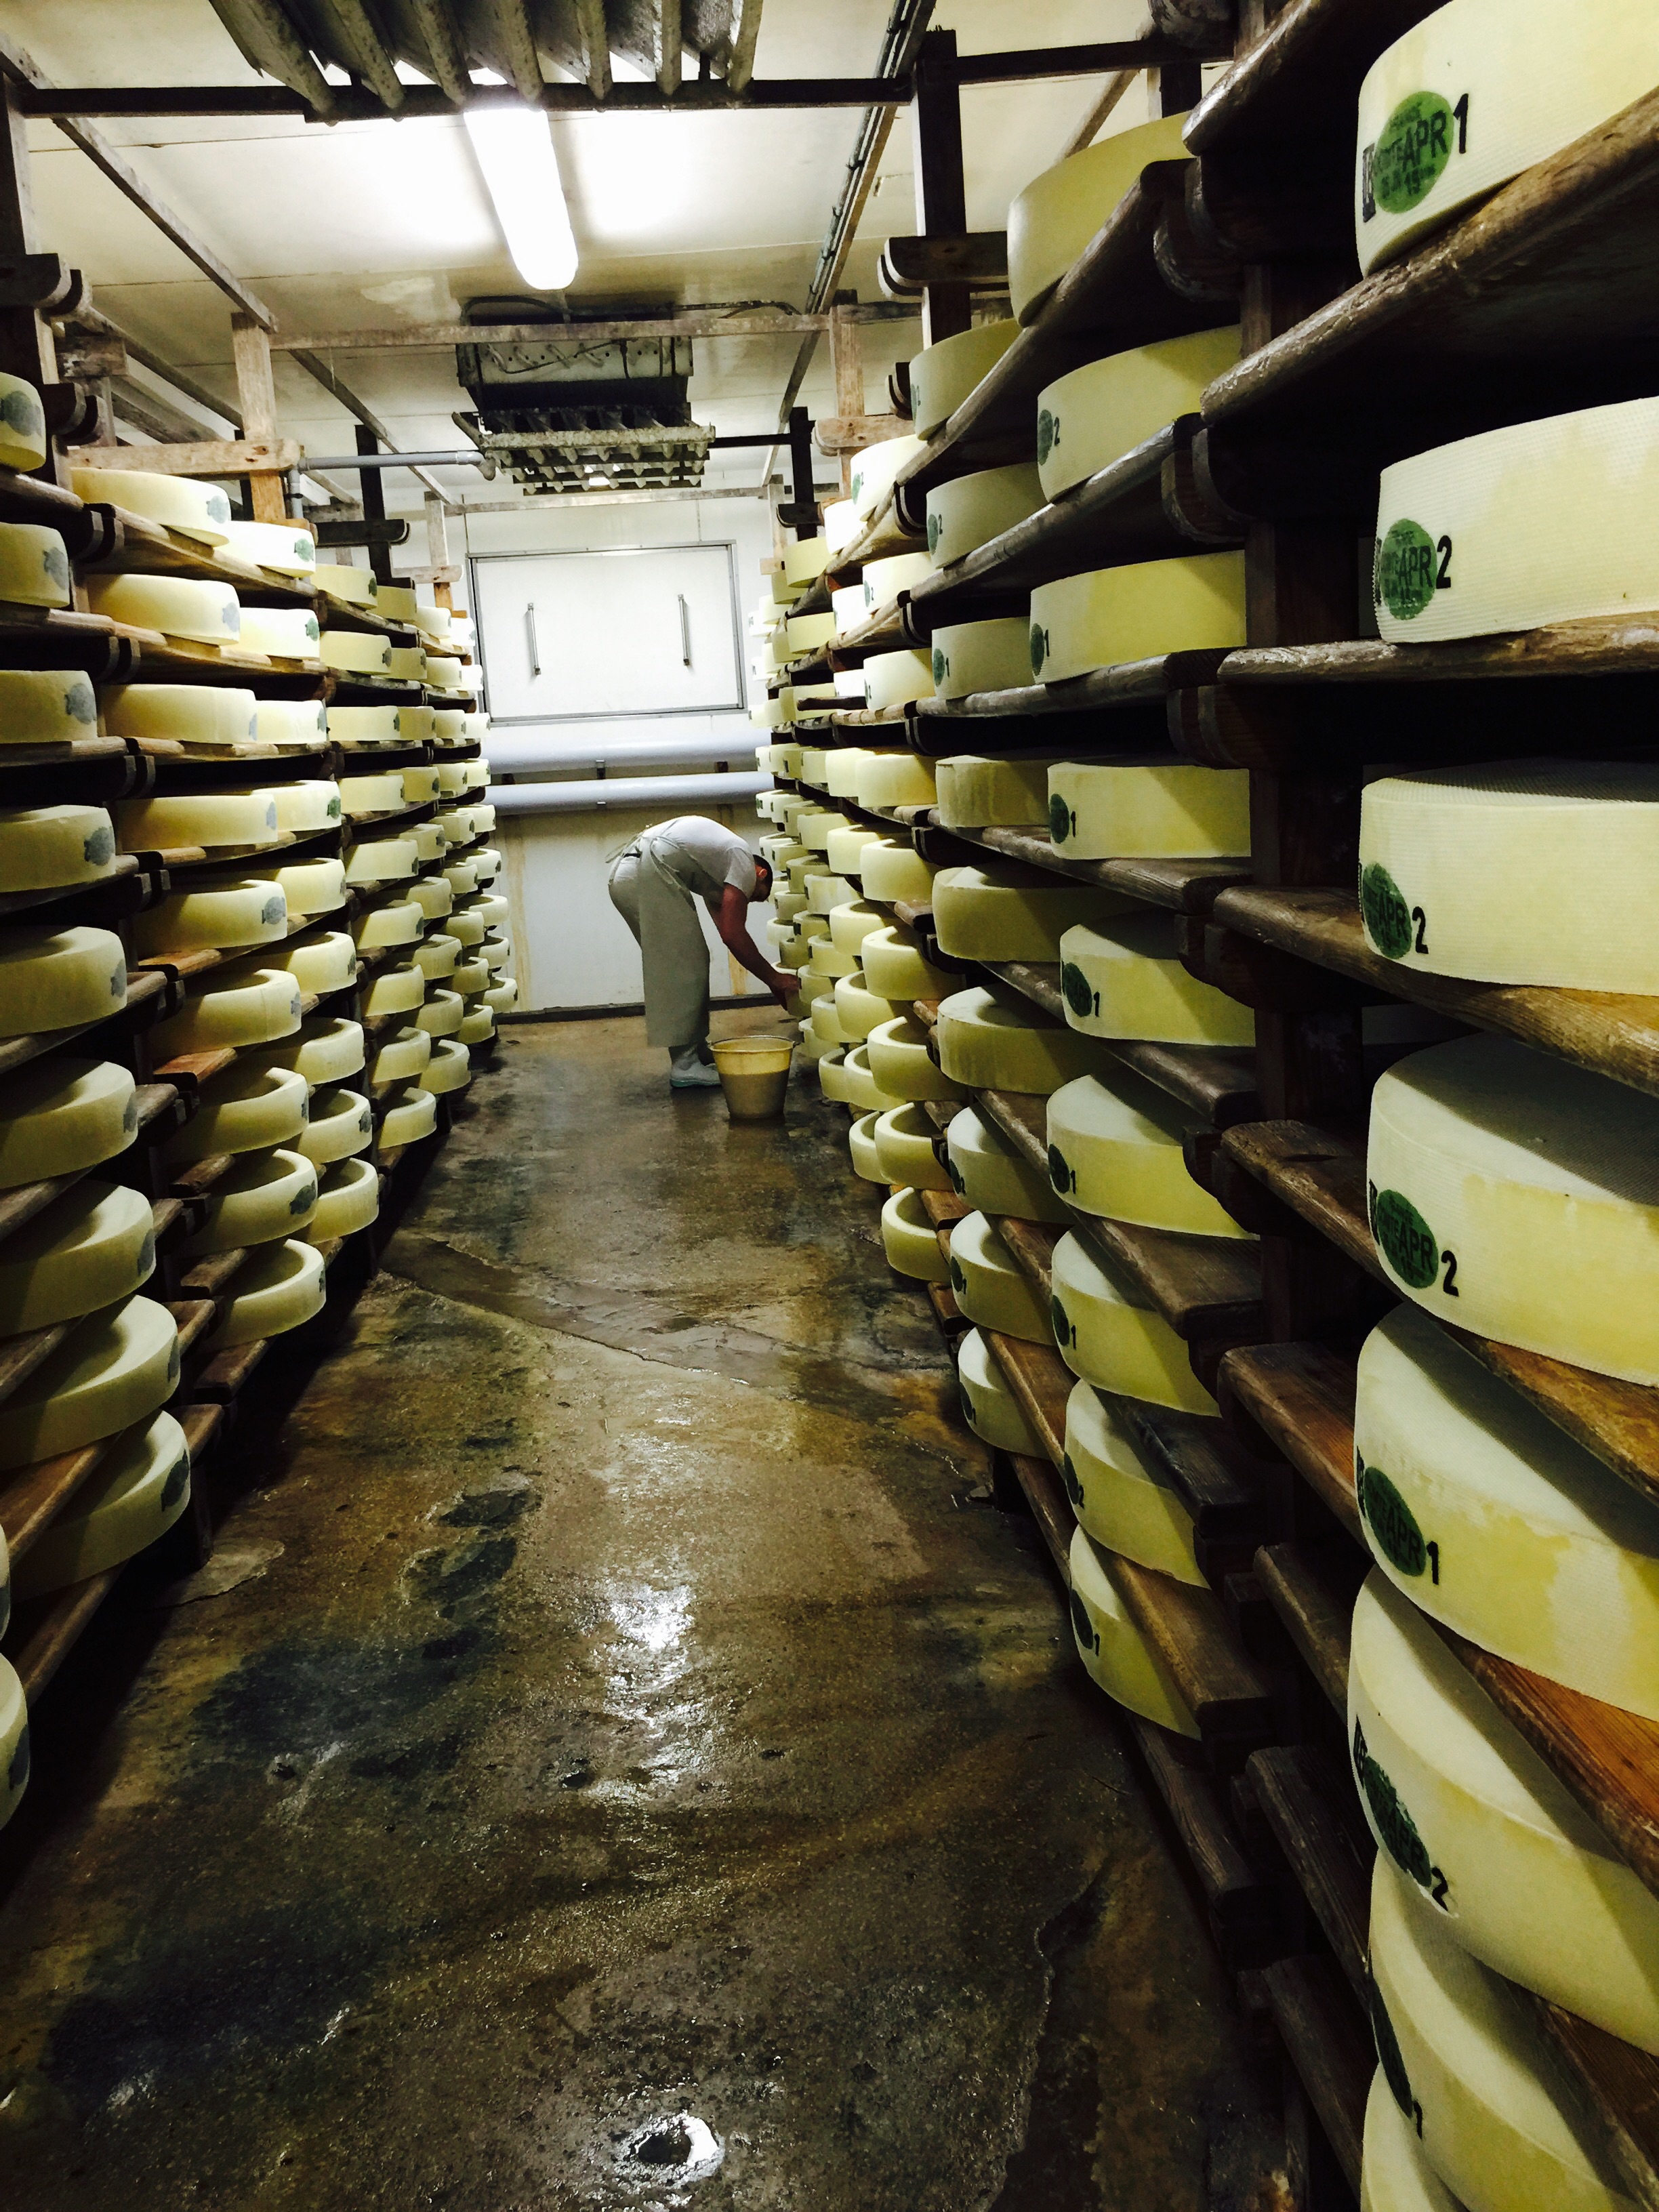  Affineur performing the daily flipping and cleaning of the 80 pound wheels of Comté. 